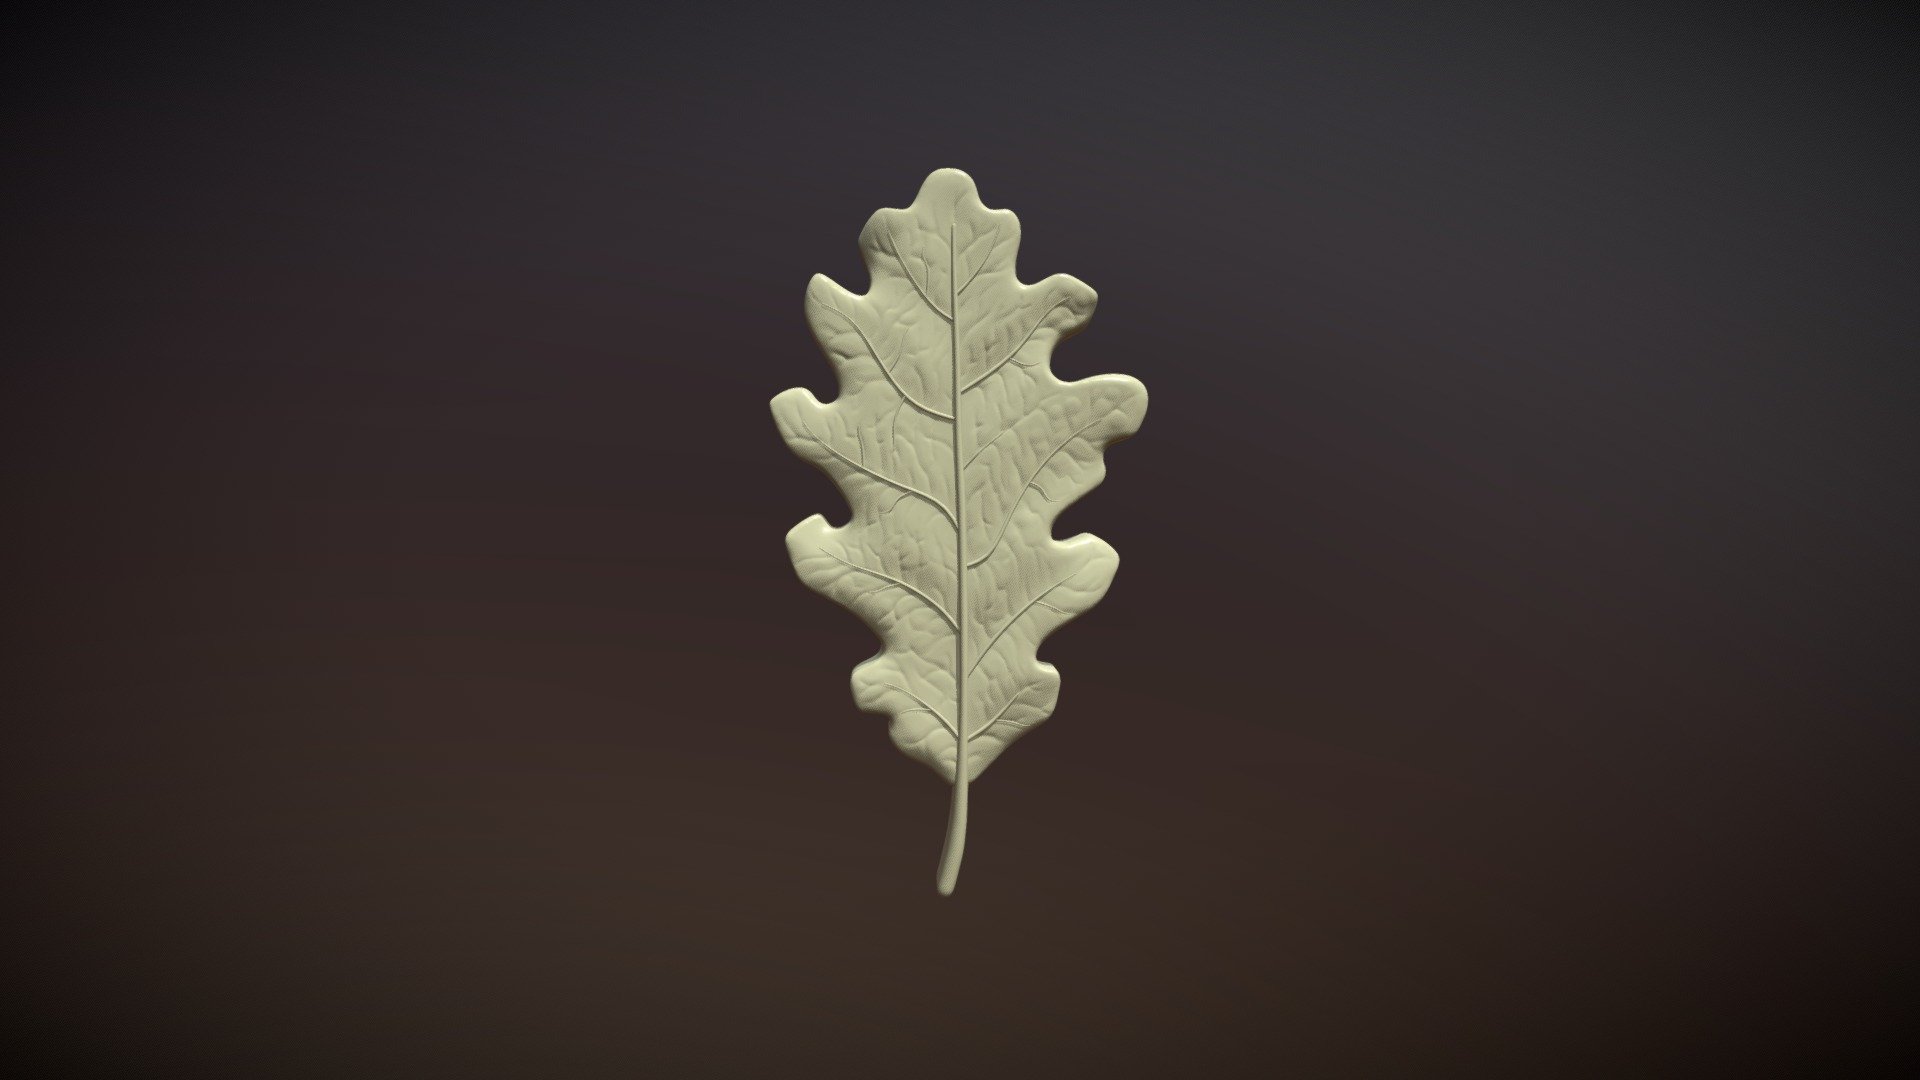 Print ready Oak Leaf.

Measure units are meters, it is about 5 cm in height. 

Mesh is manifold, has no bad contiguous edges.

============================================================

File contains one solid object that consists of 124174 triangular faces.

Available formats: .blend, .fbx, .stl, .obj, .dae.

============================================================

Cycles materials that was used for rendering are available in .blend file 3d model